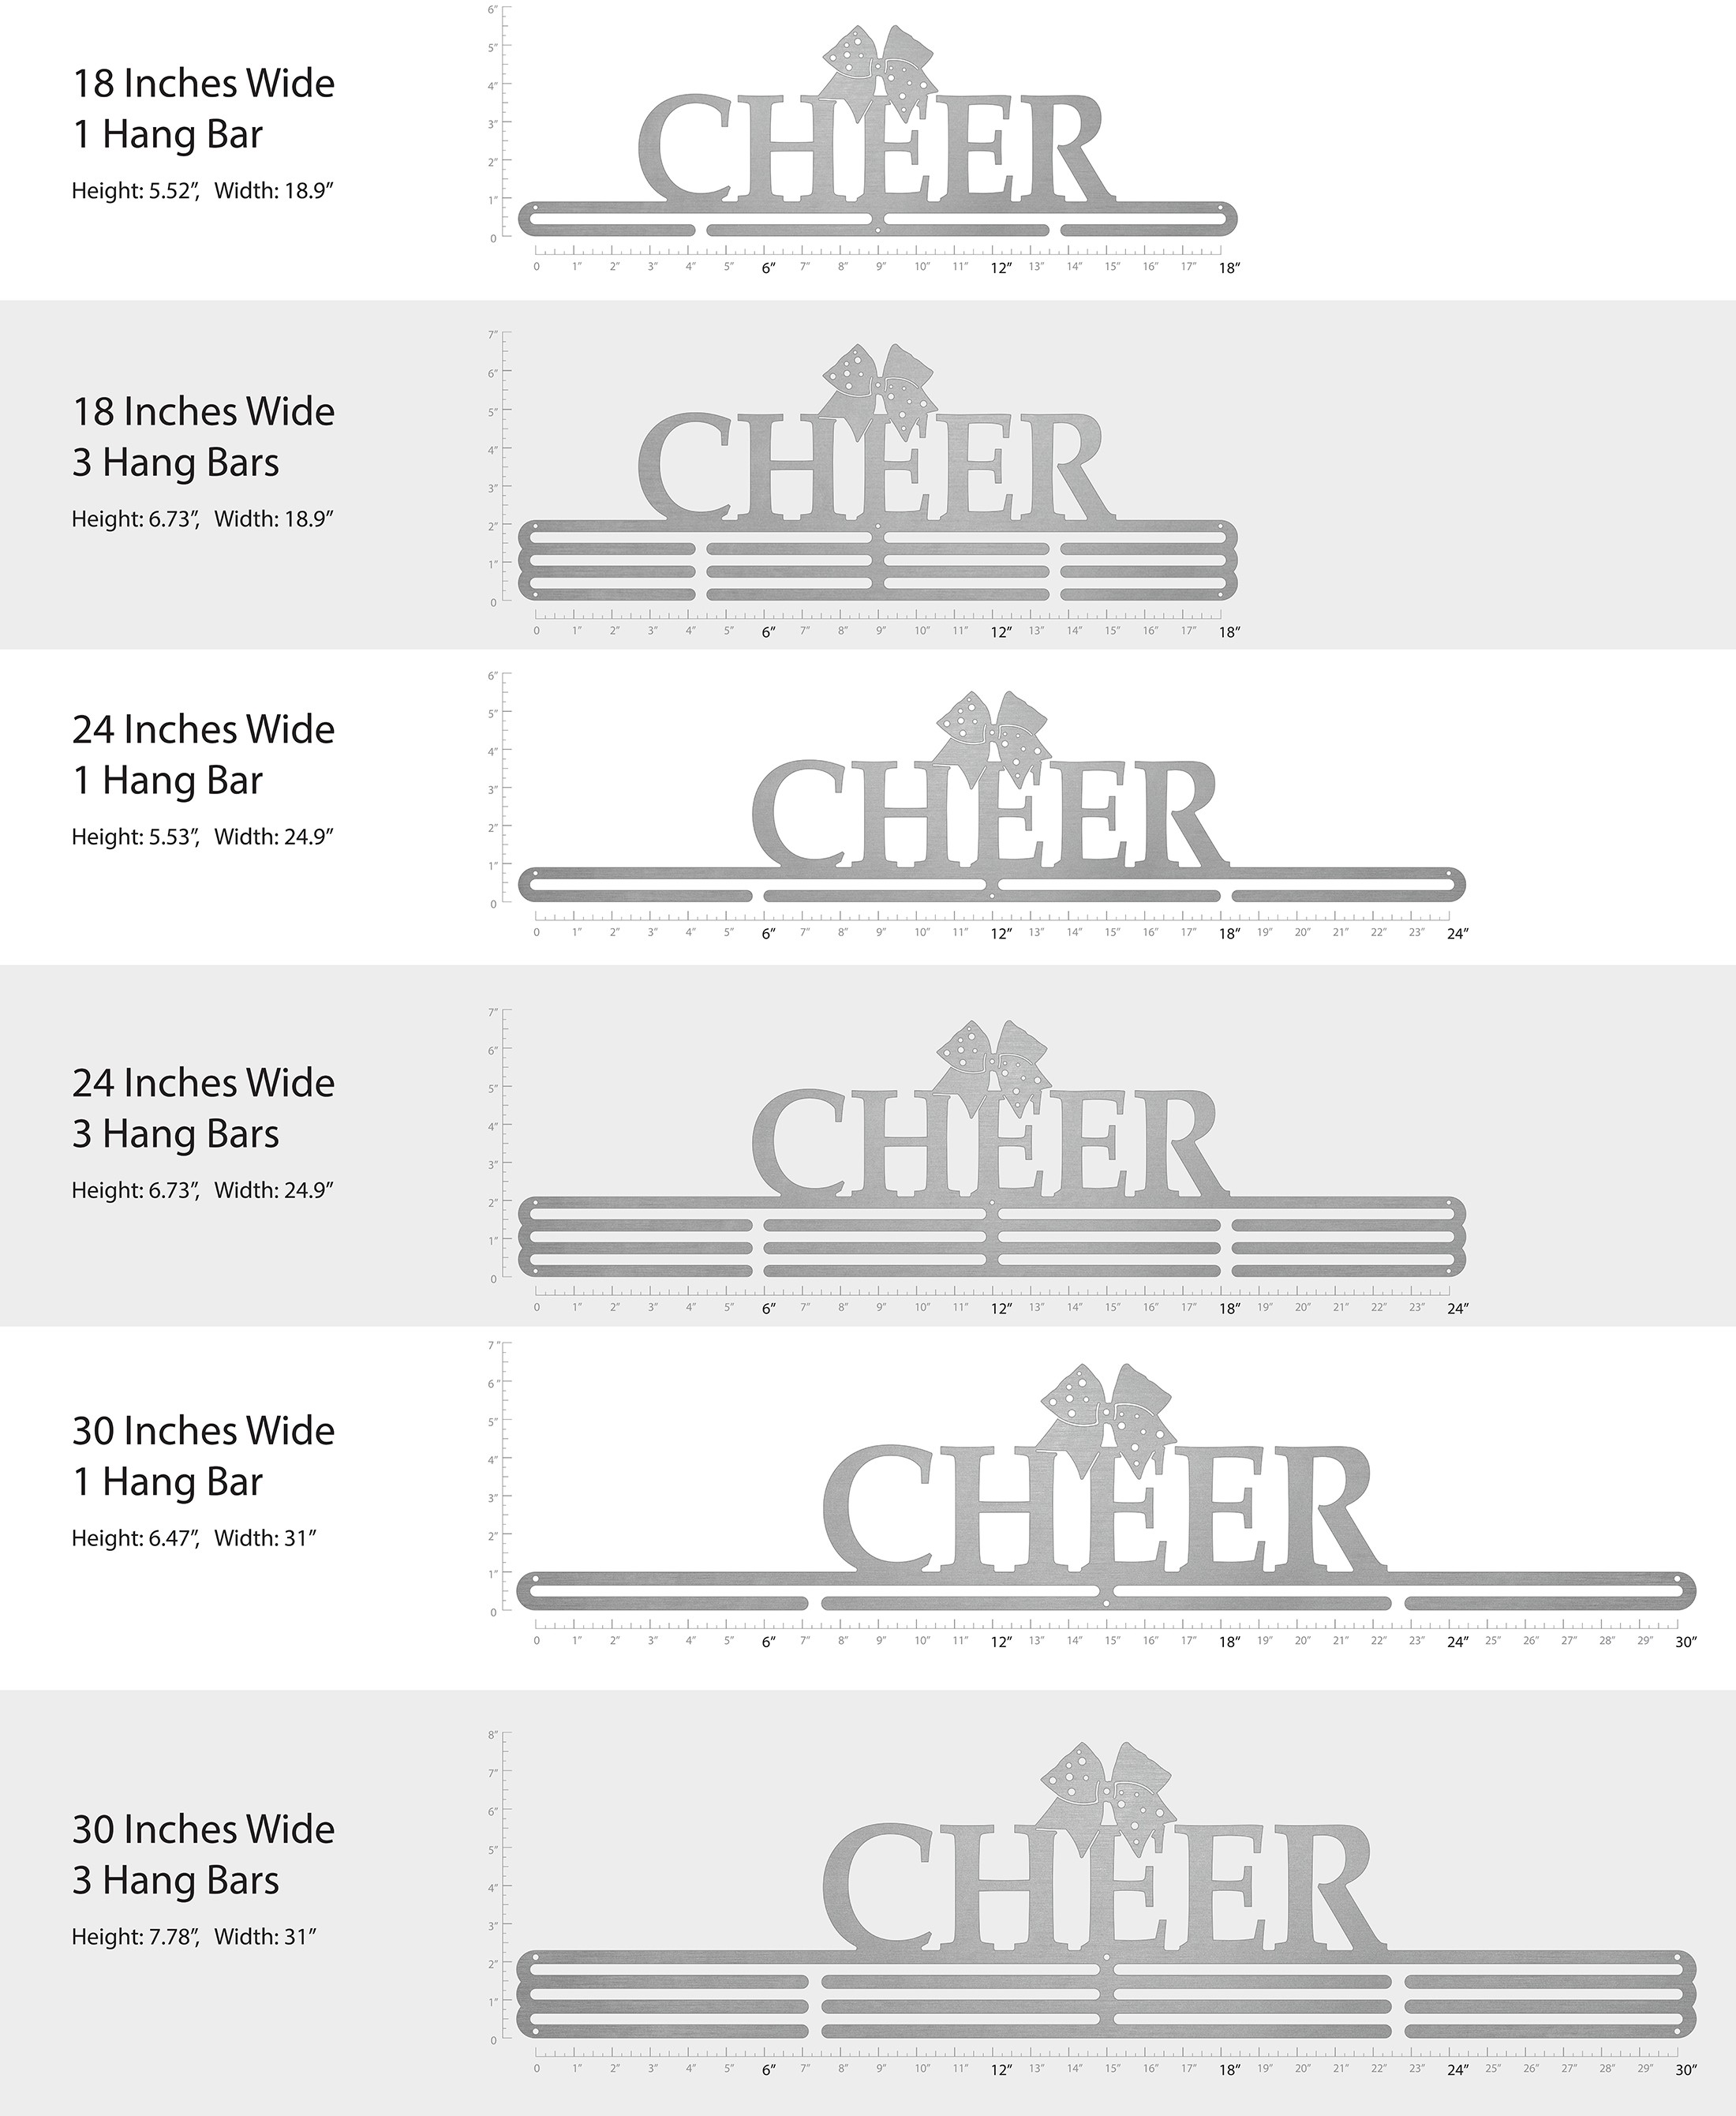 Cheer! - With Bow